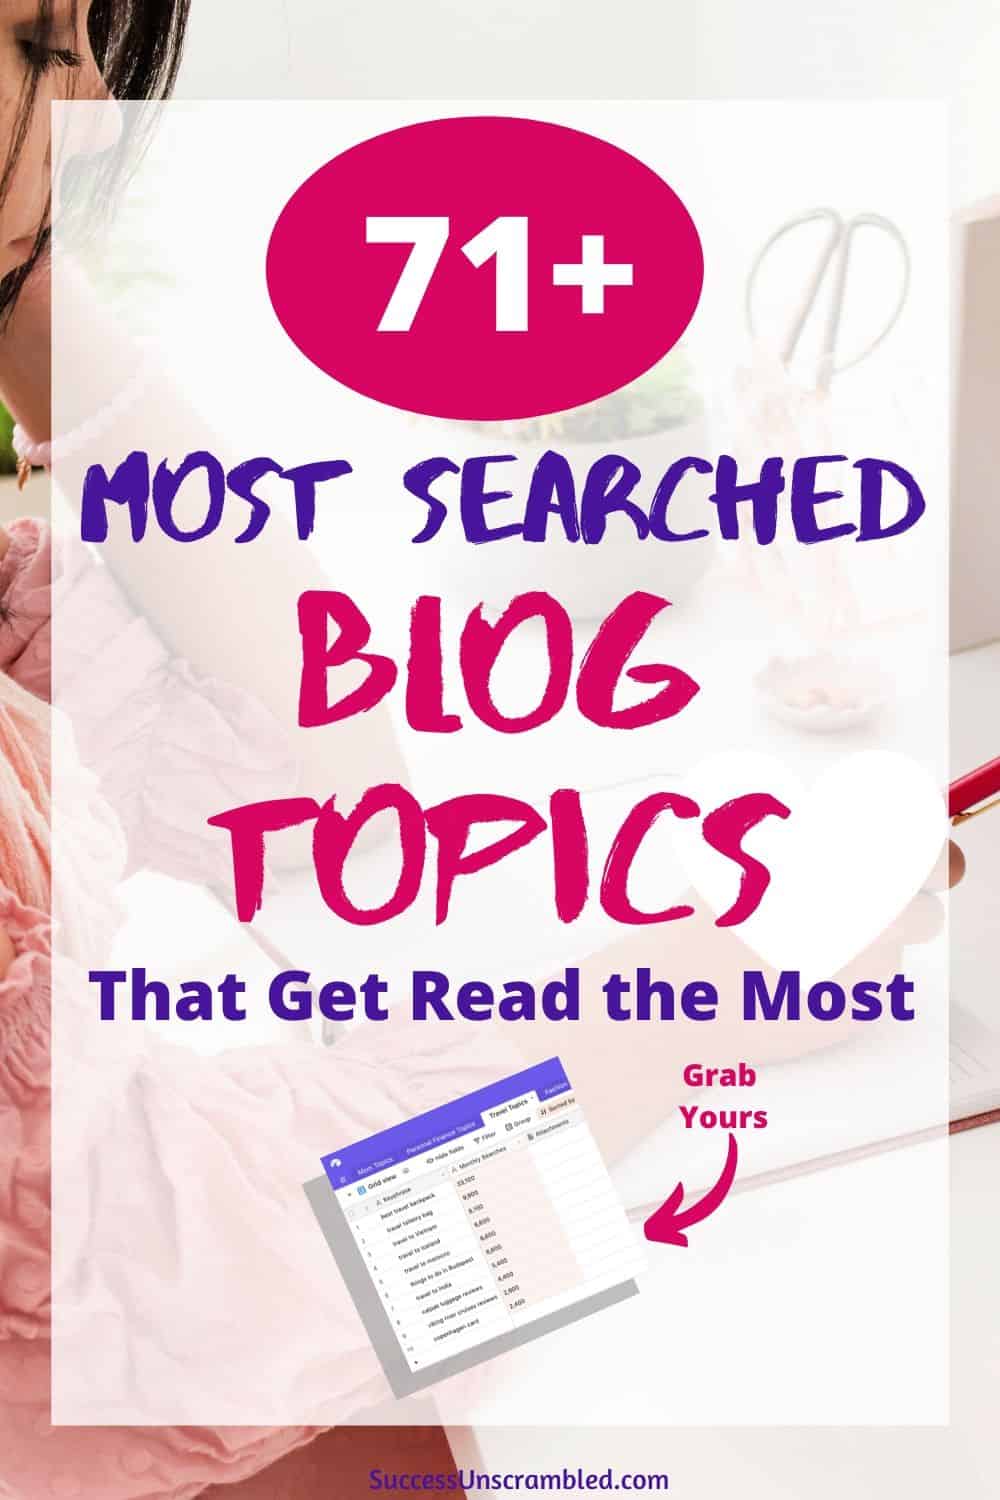 71+ most searched blog topics that get read the most